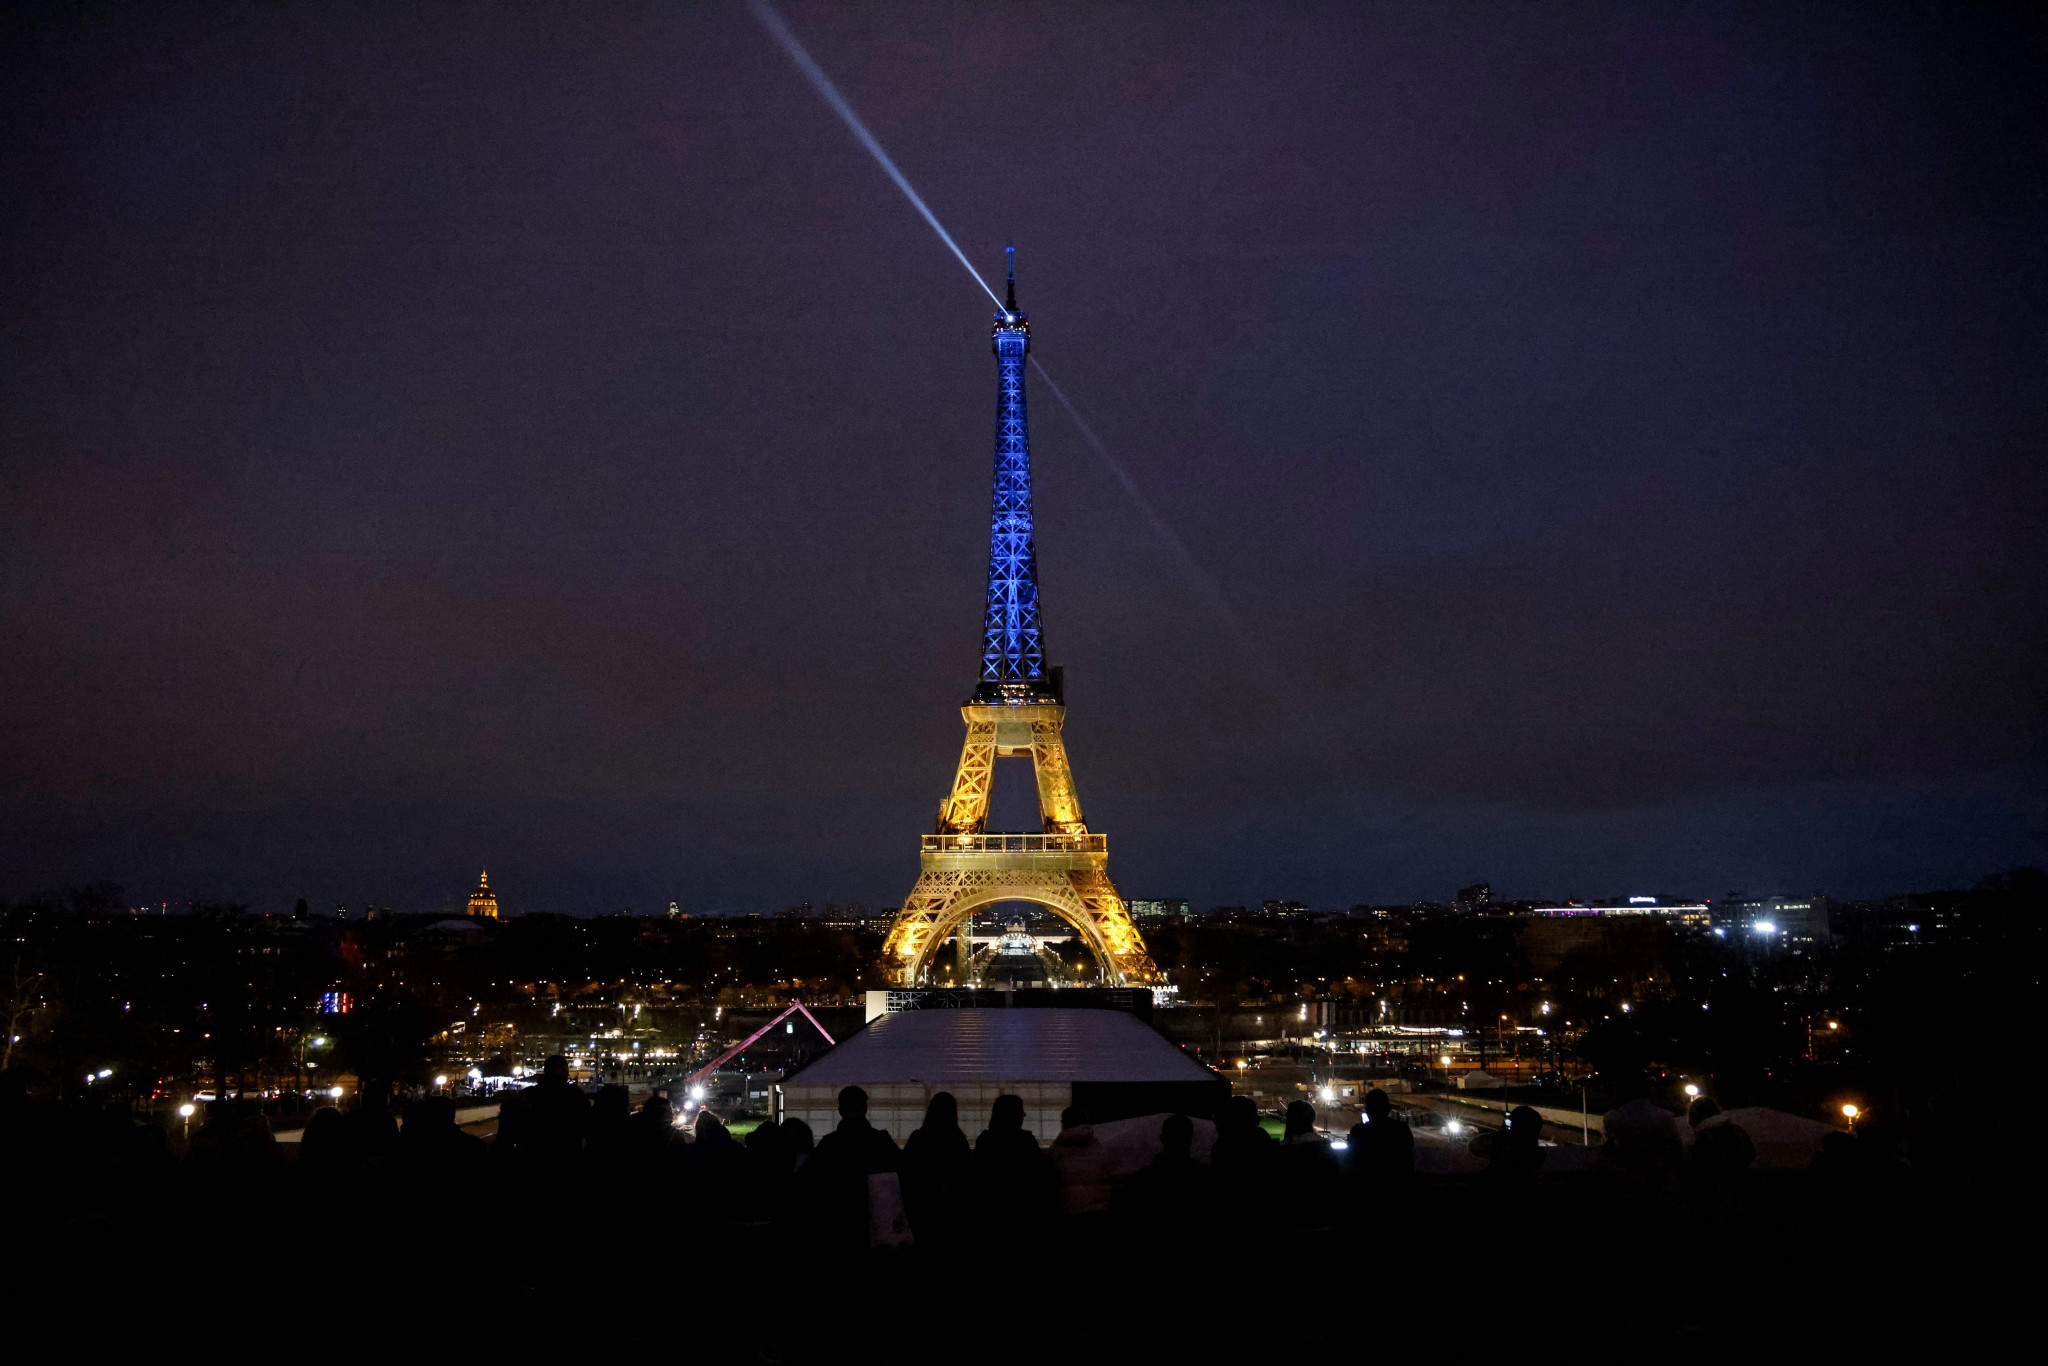 Ukraine's blue and yellow lights up Paris 2024 landmark Eiffel Tower and France joins UN condemnation of Russia